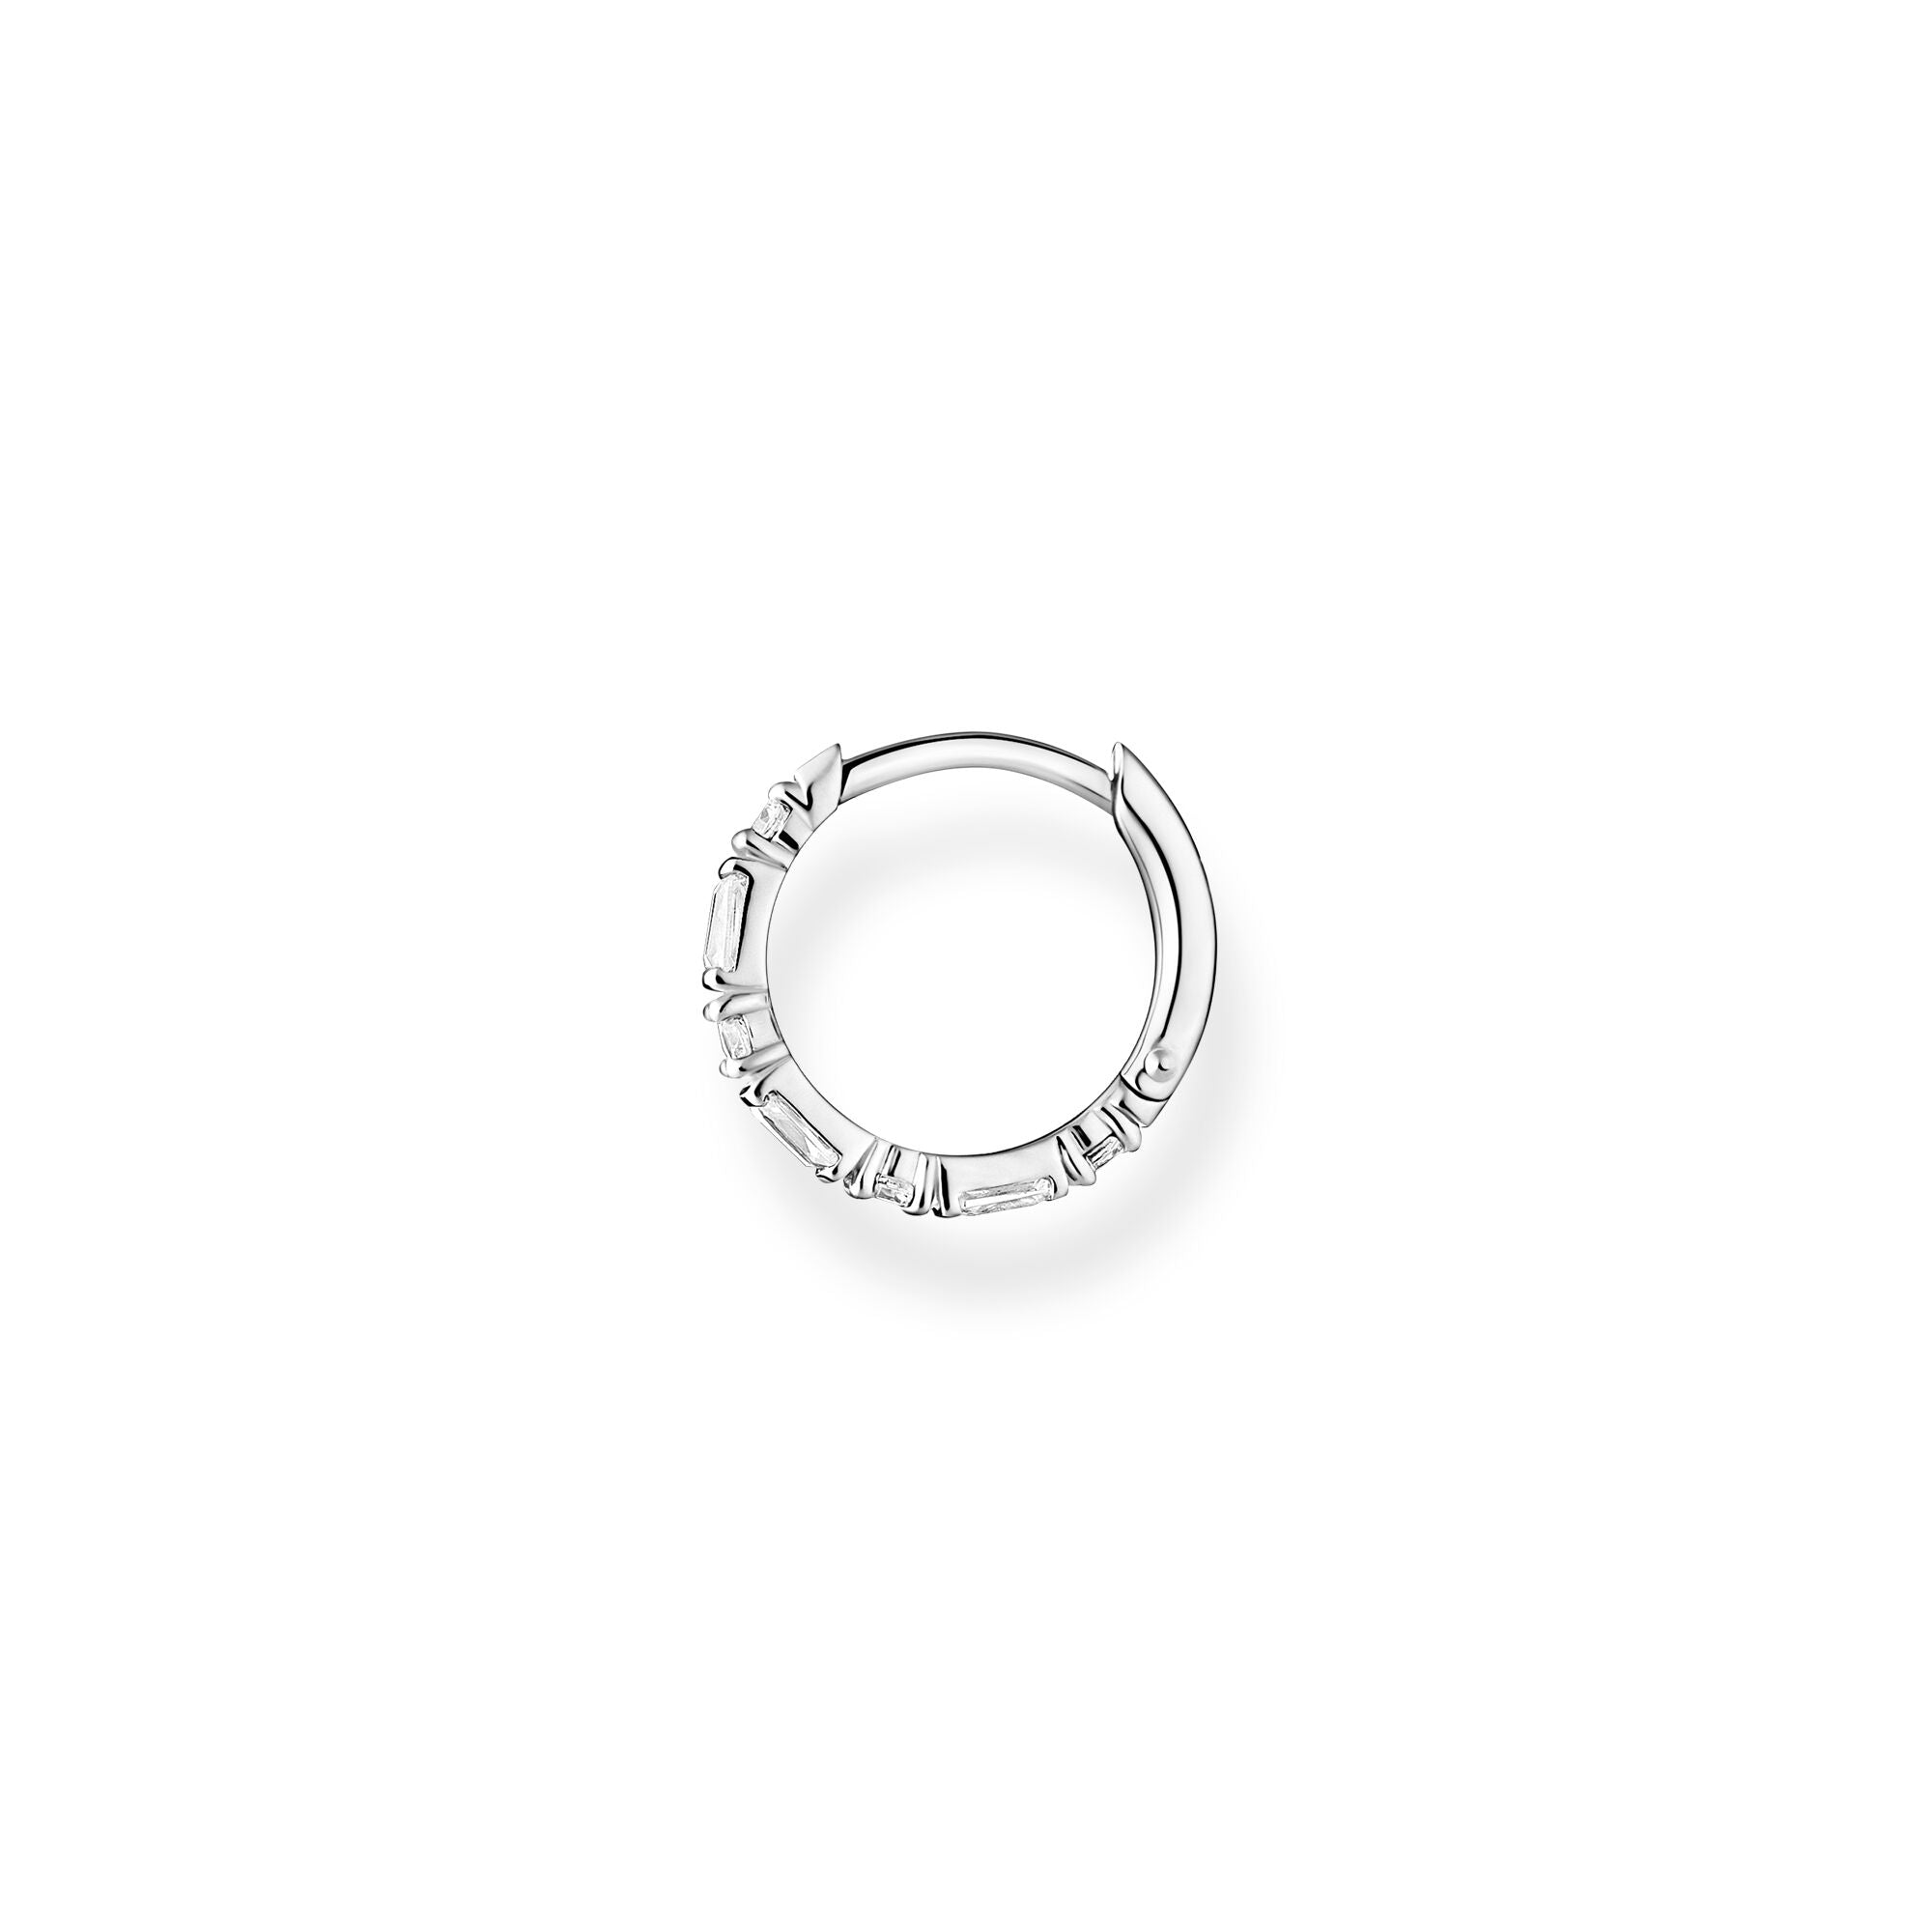 Thomas Sabo sterling silver and white baguette stones, clicker style single hoop earring